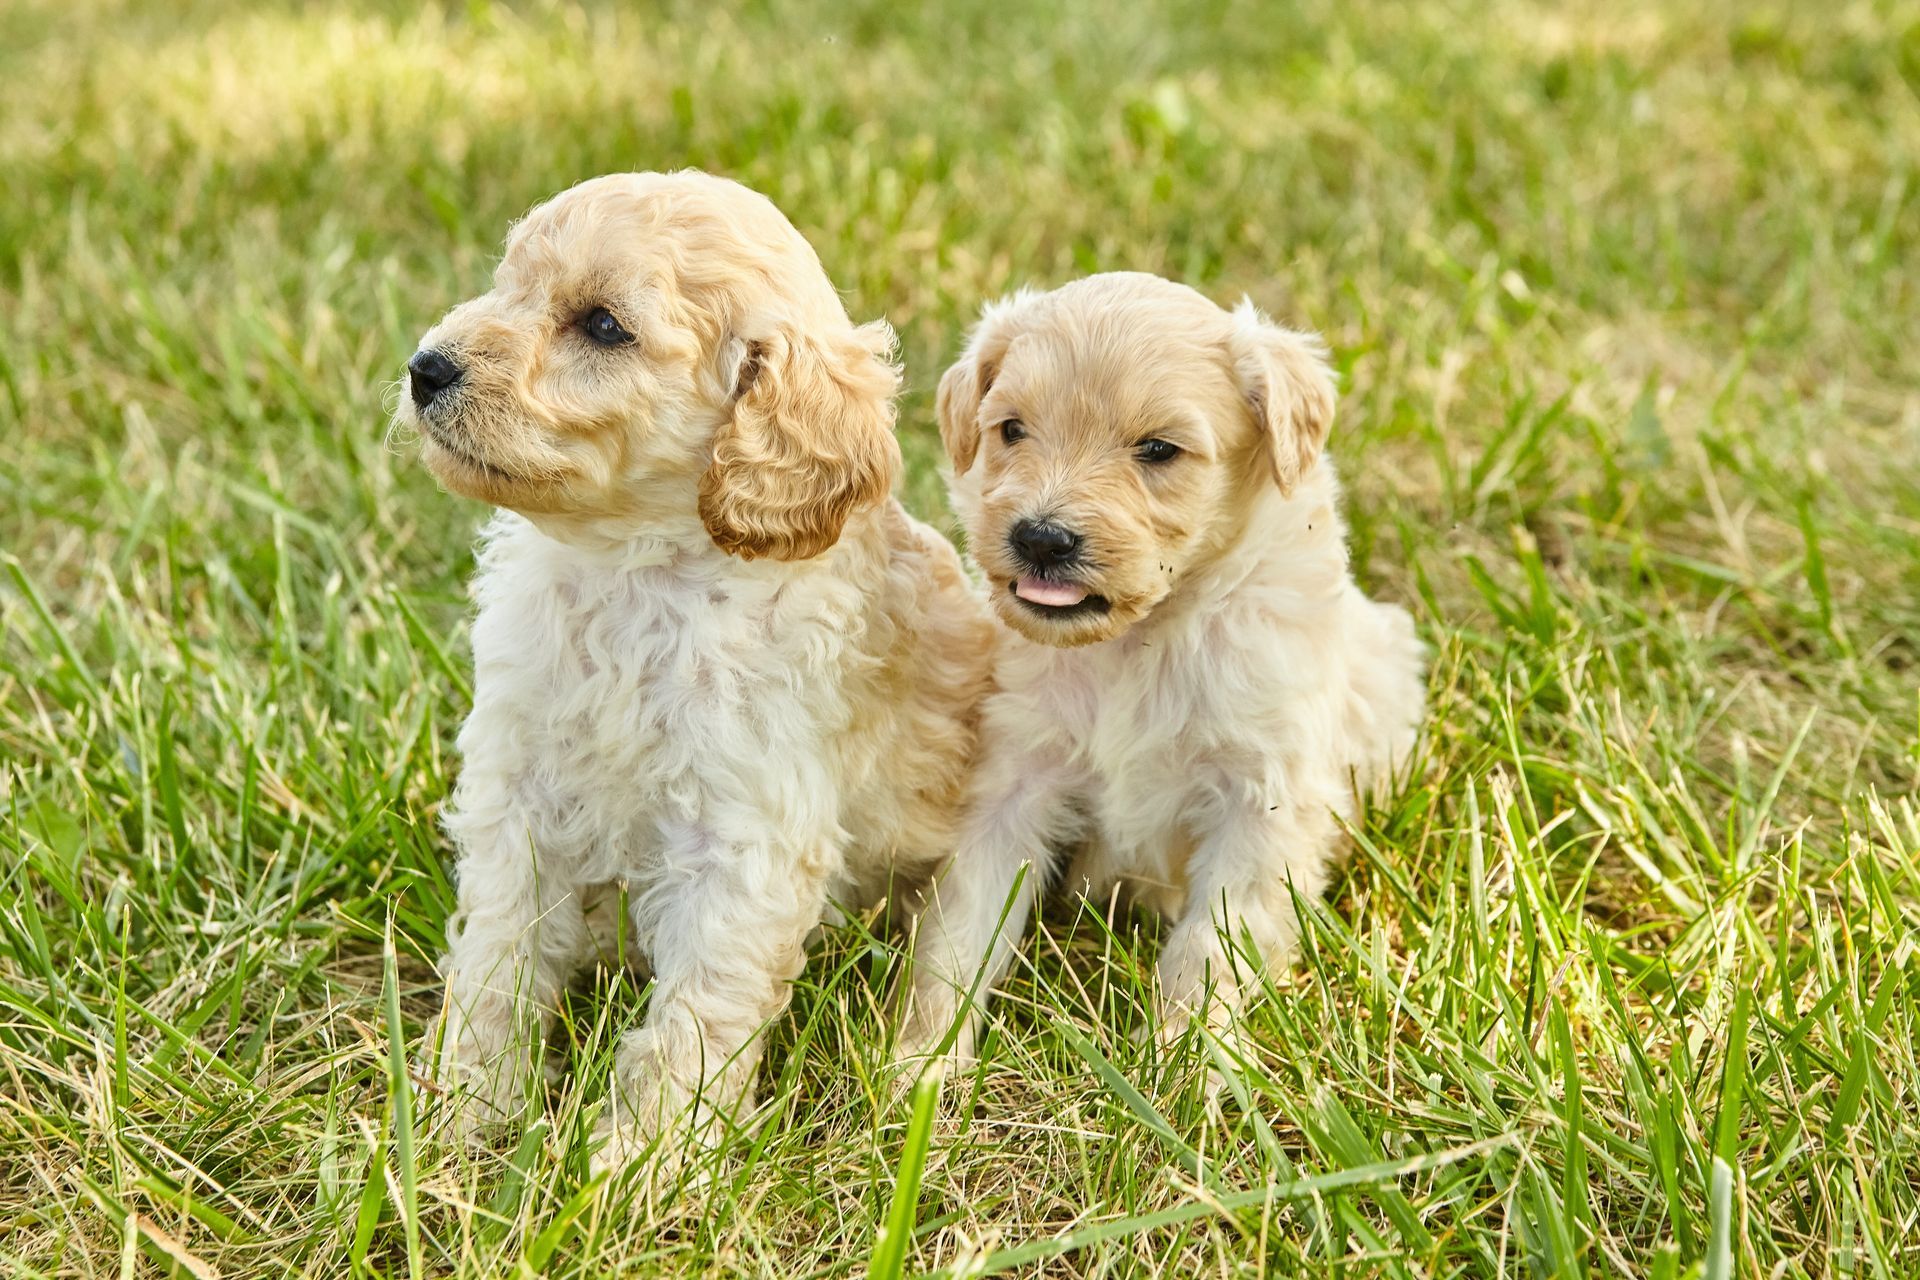 two puppies are sitting in the grass together